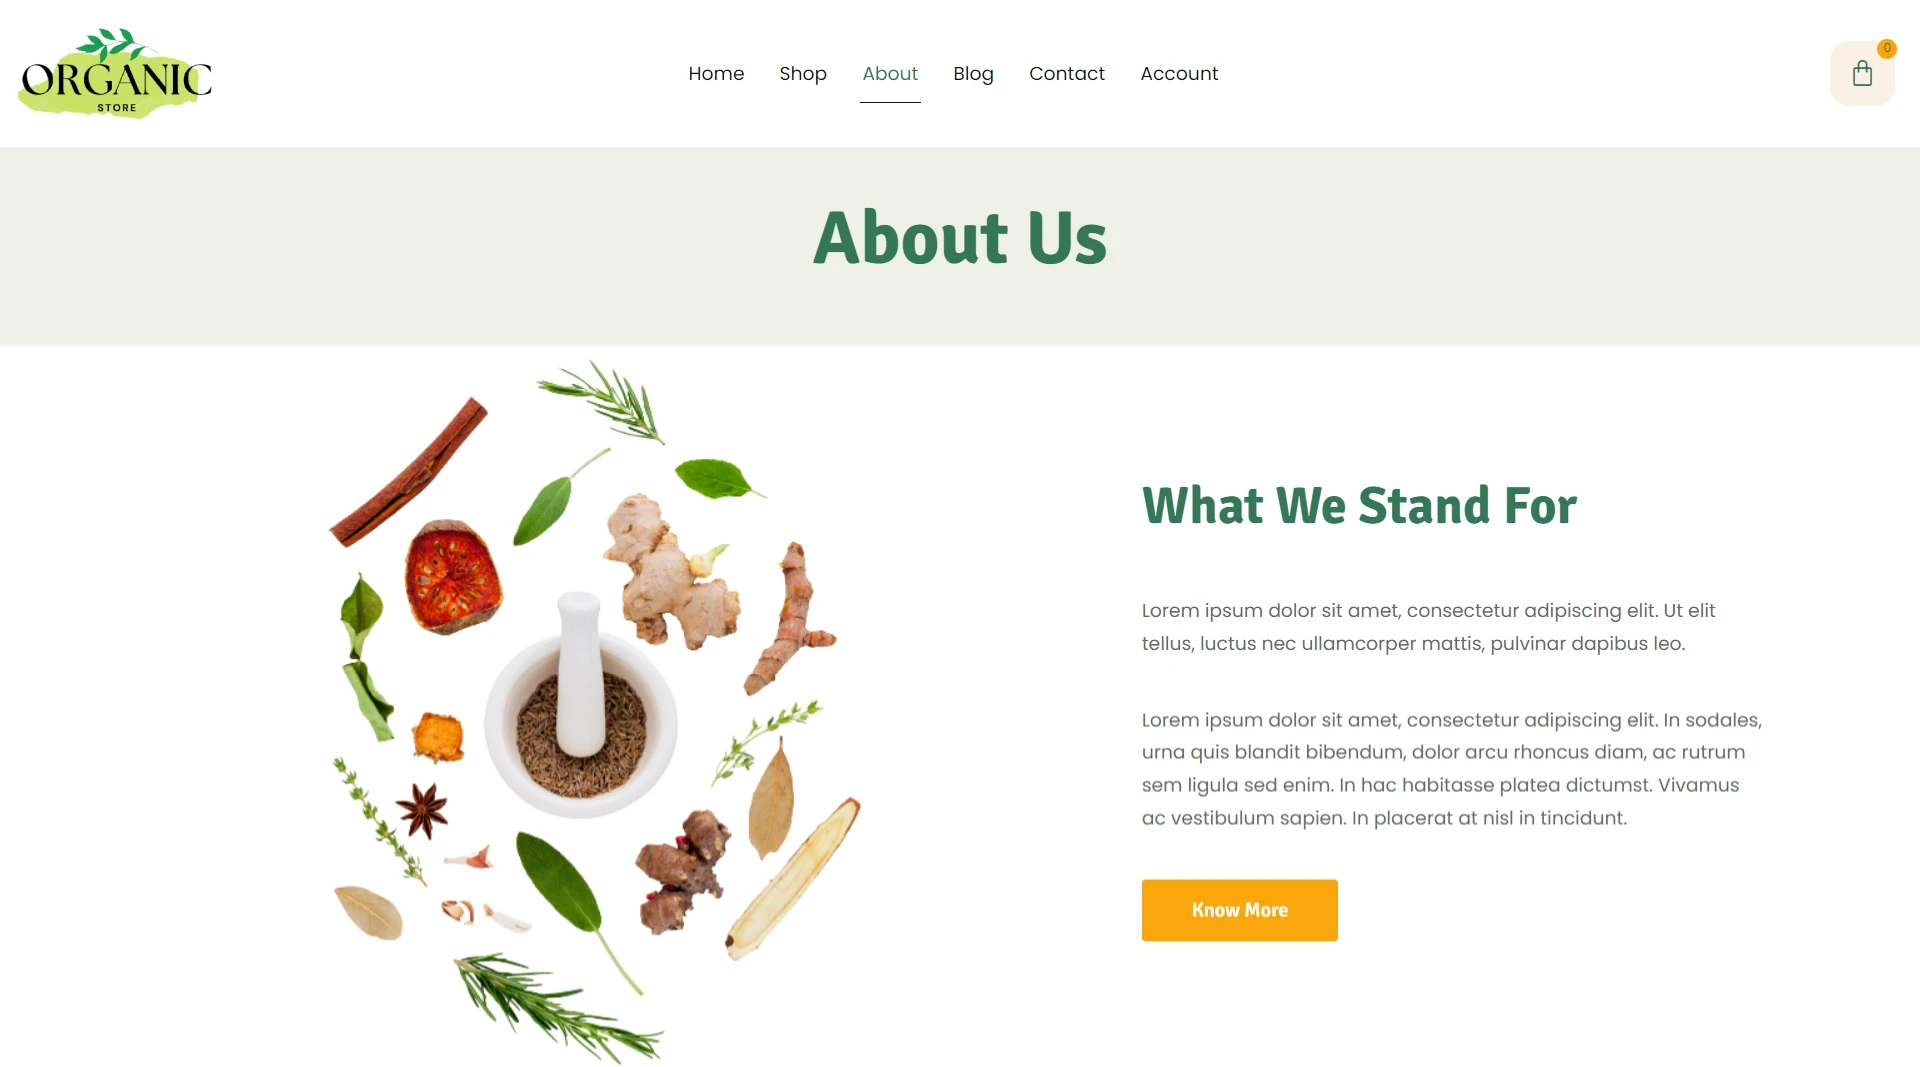 Organic store website template - About Us